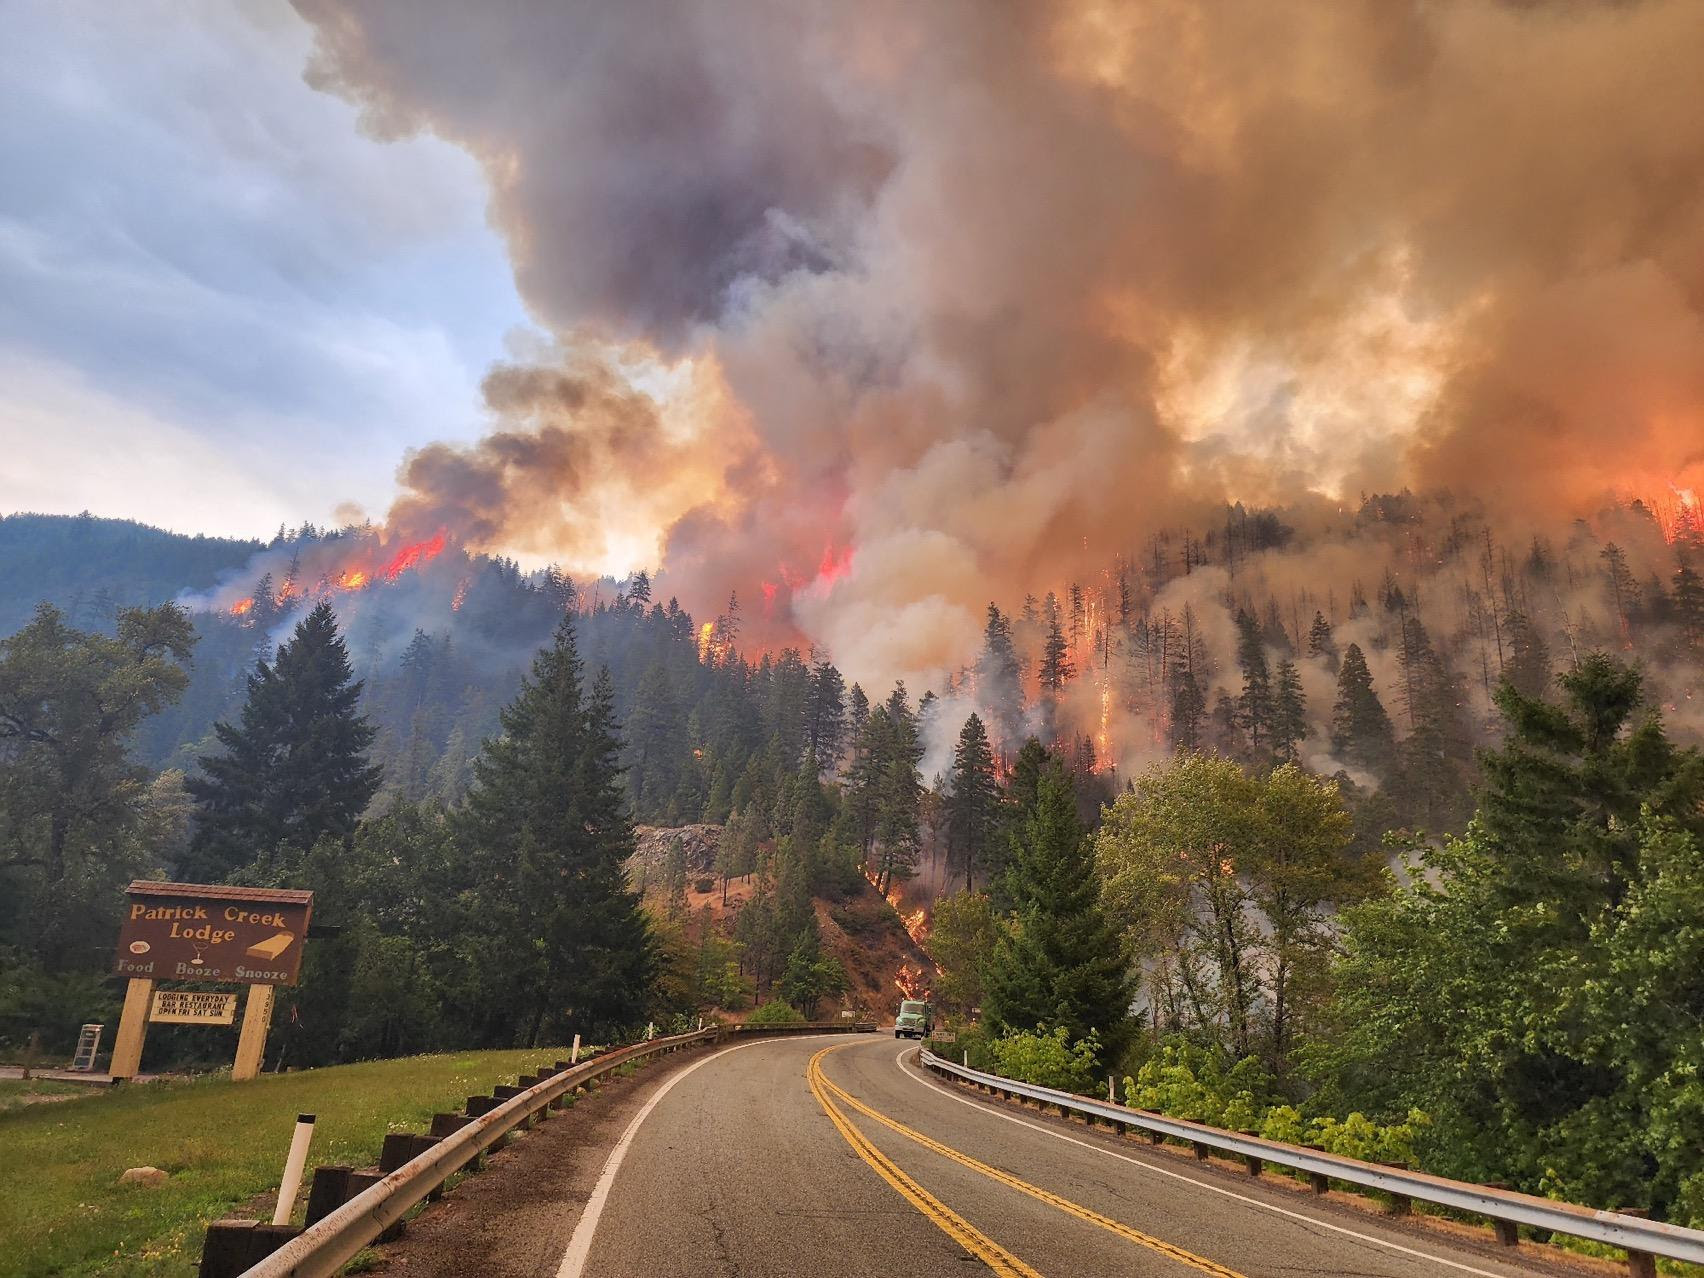 Billowing smoke over a fiery forest with road leading in.